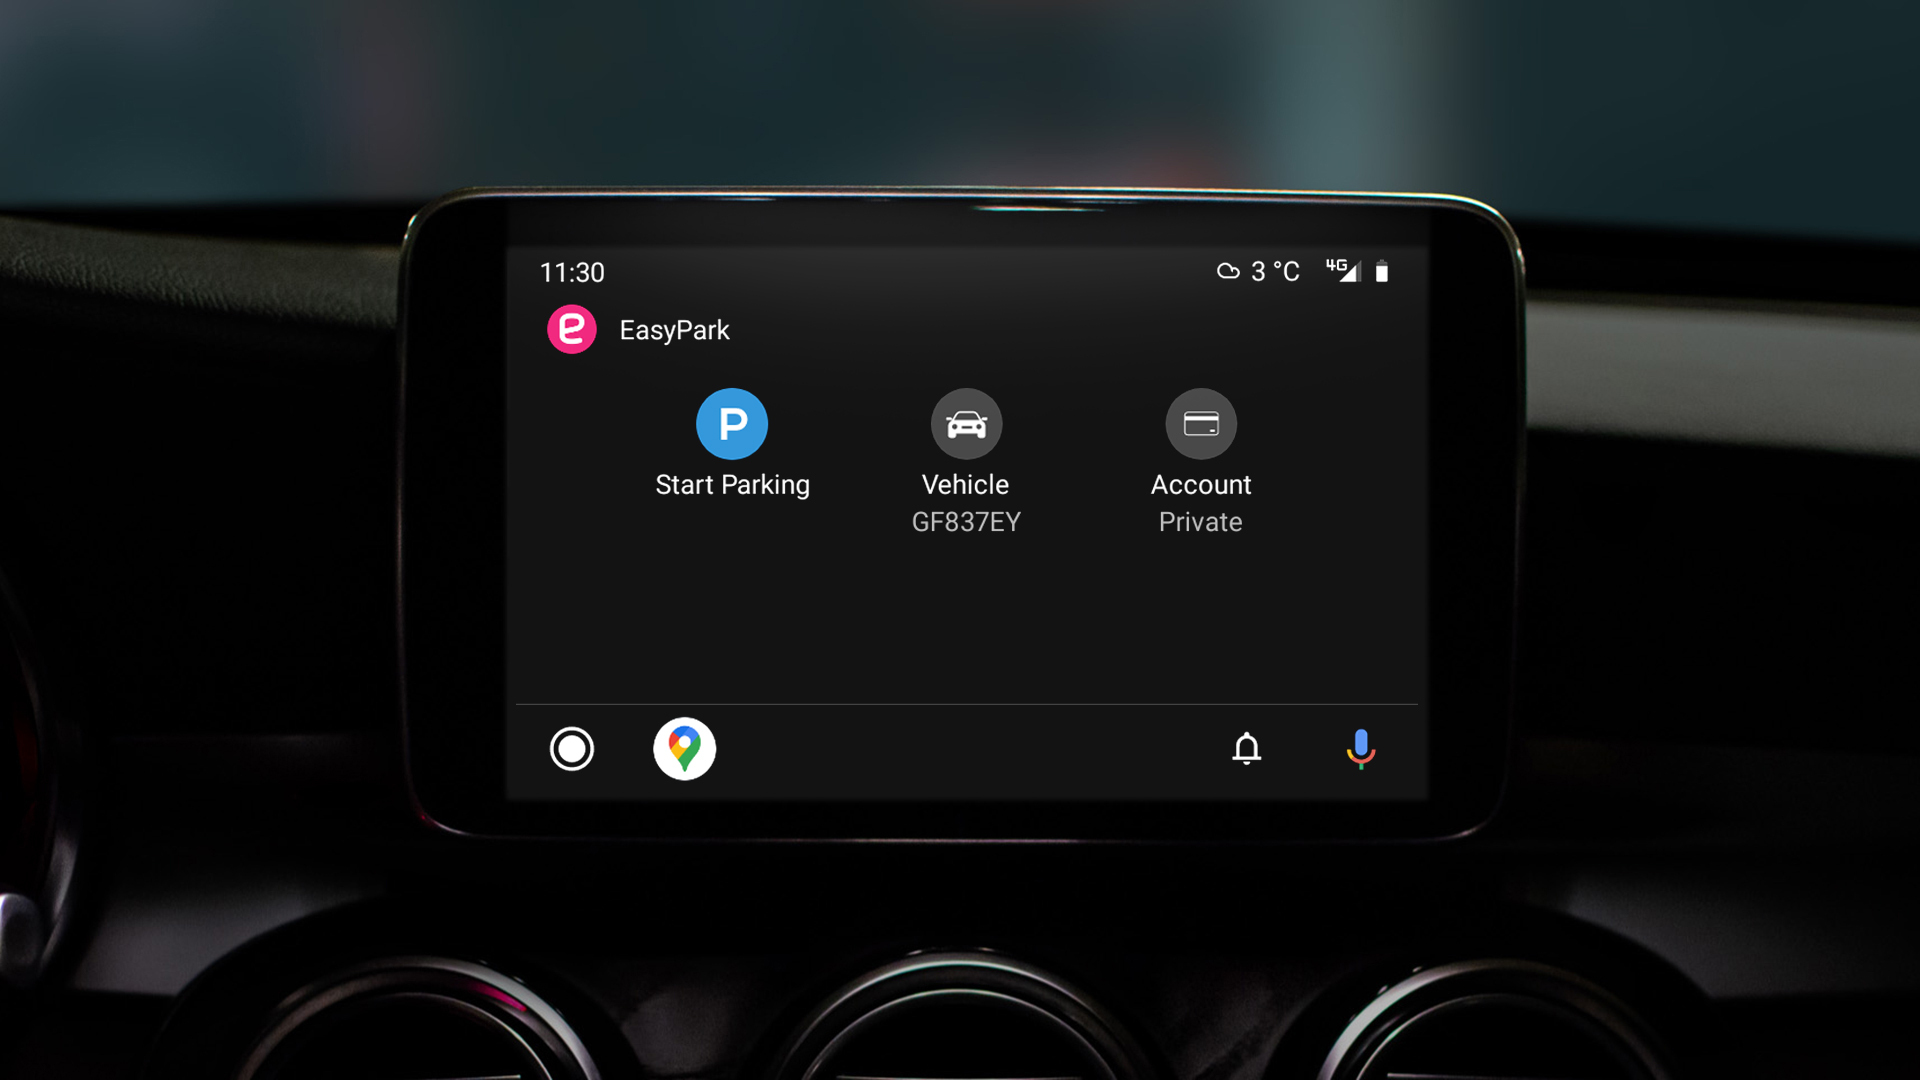 Android Auto™